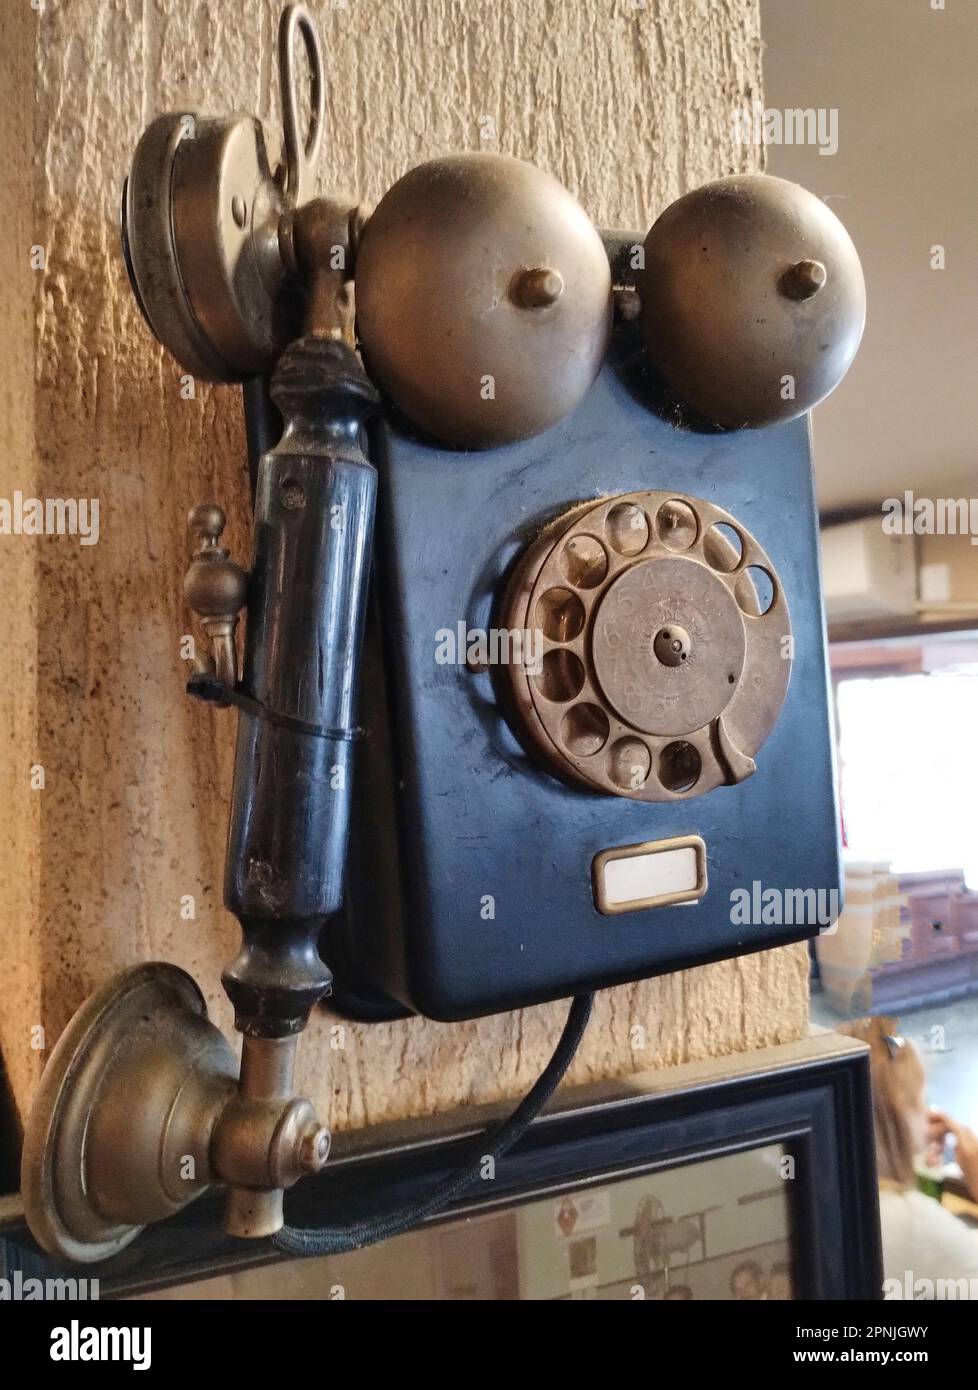 old black wall phone used as decoration Stock Photo